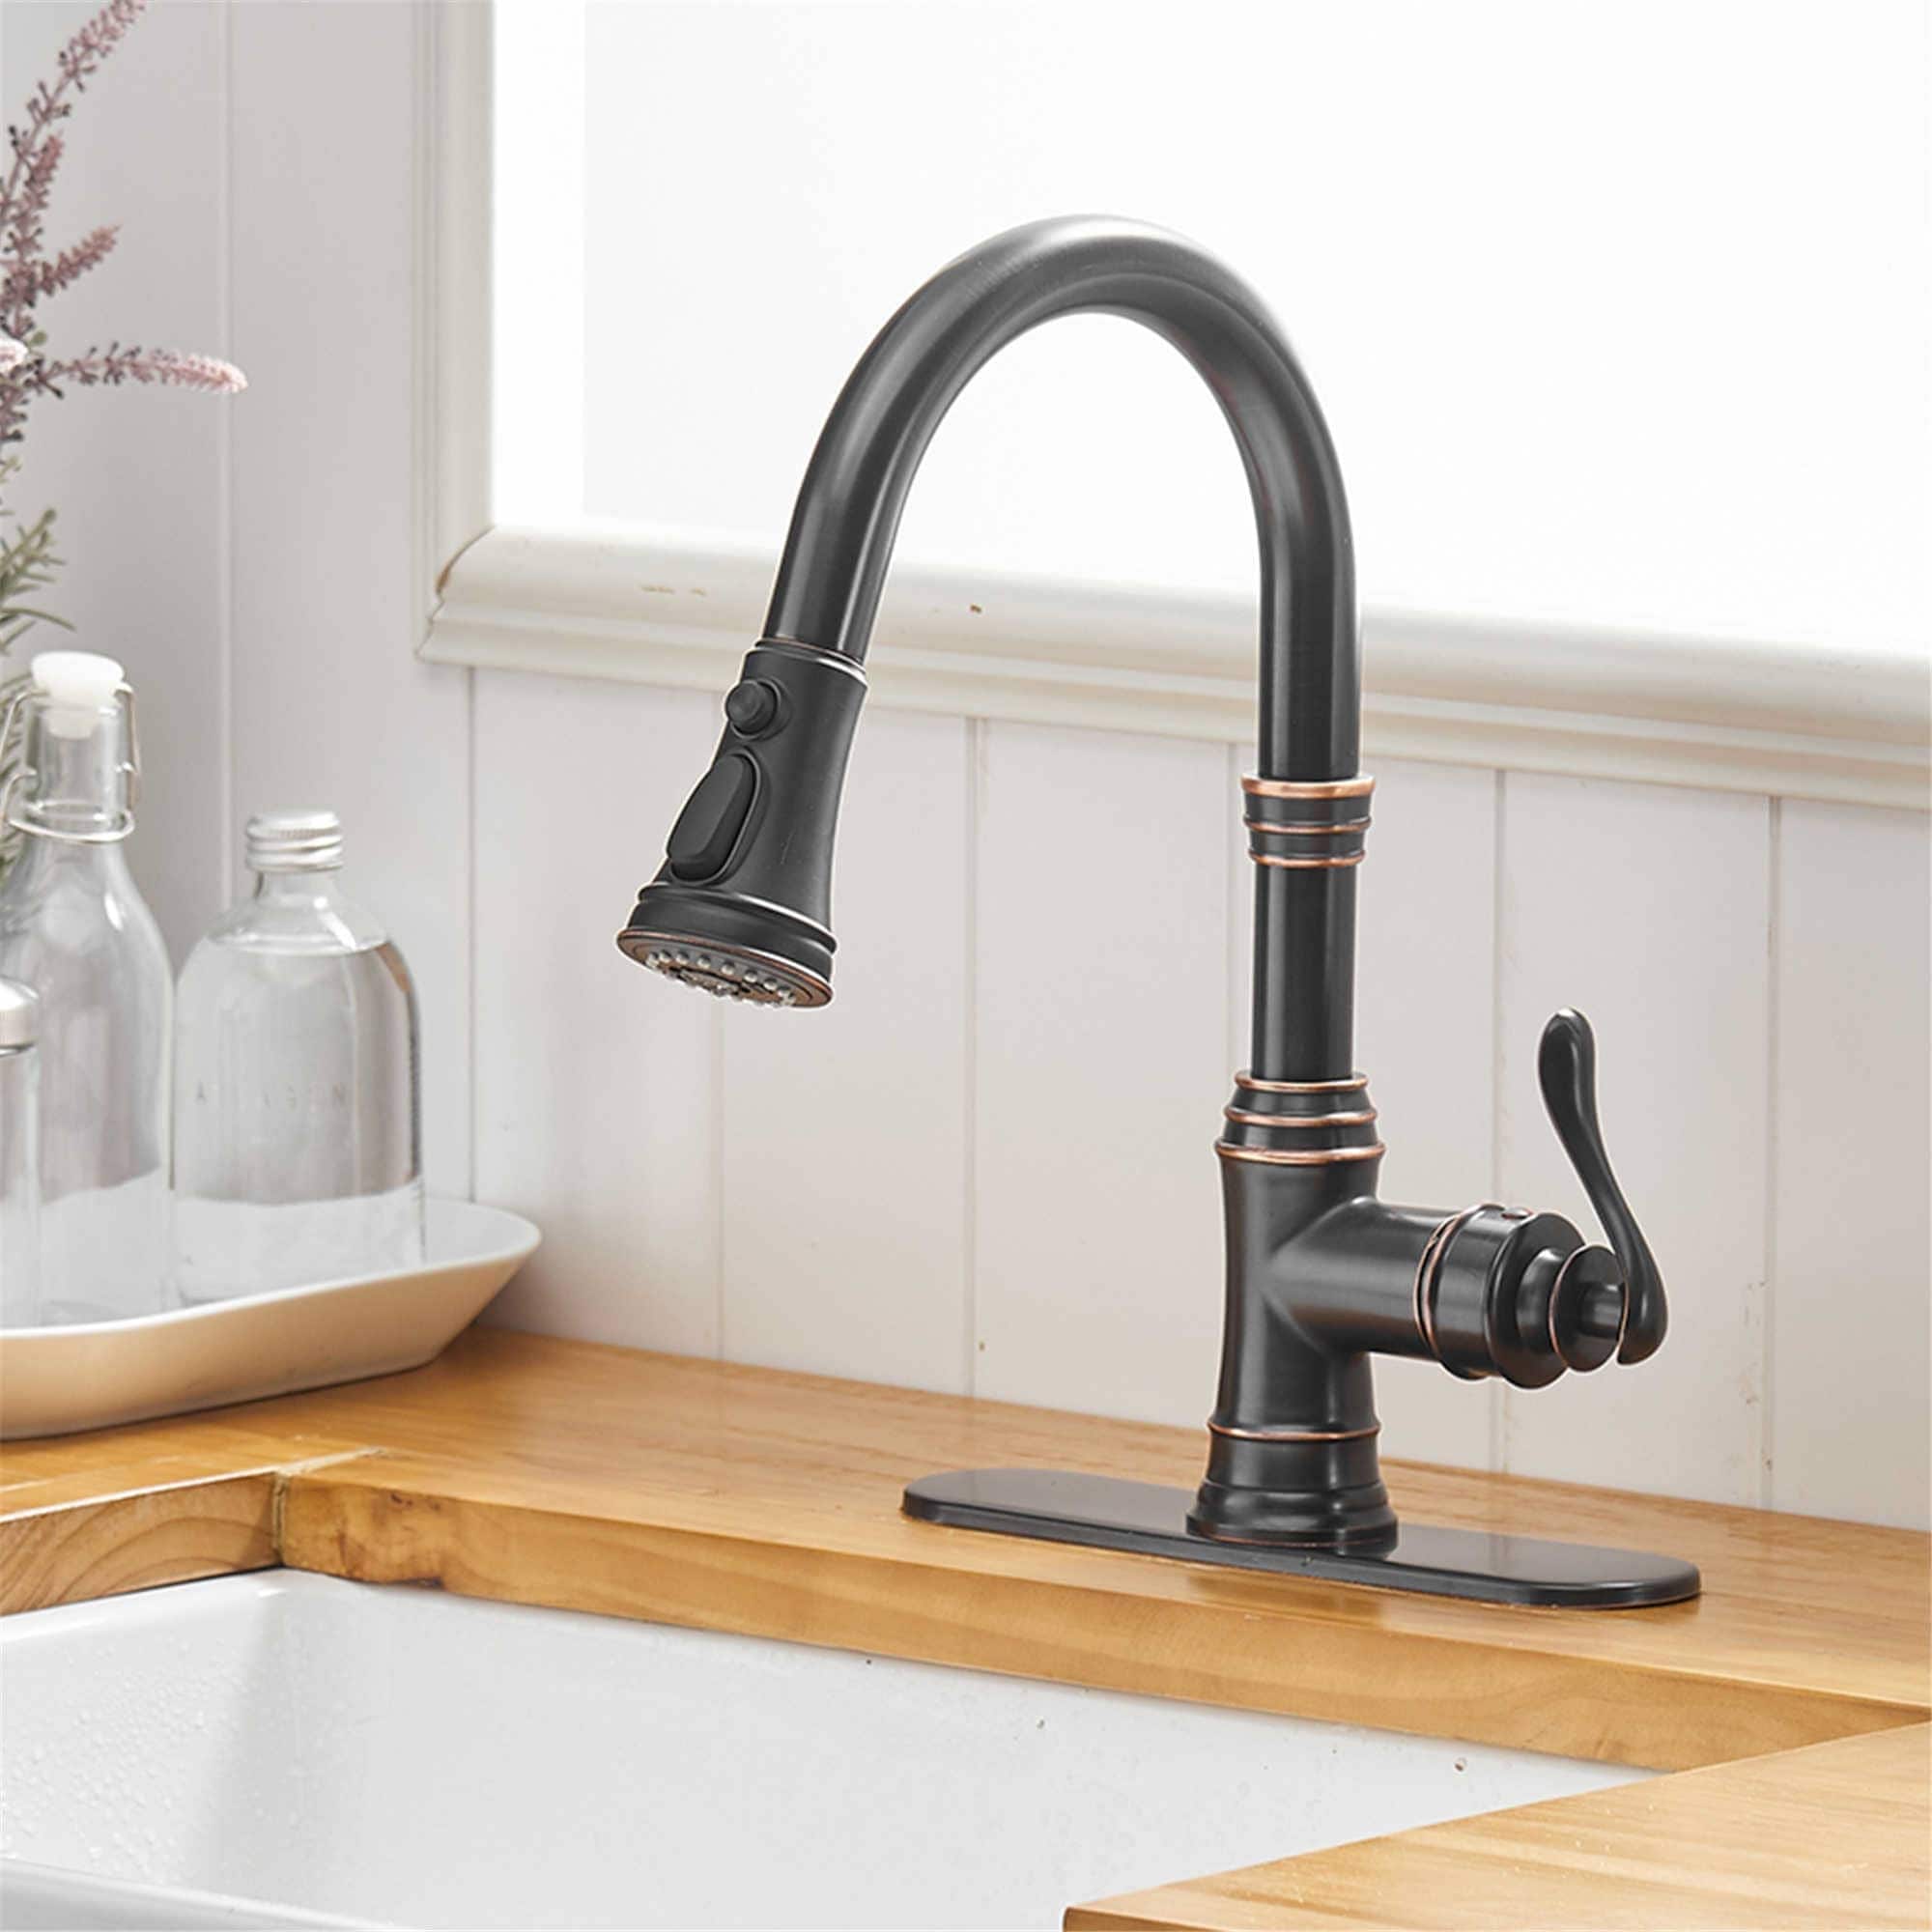 Pull Down Kitchen Sink Tap Deck Mounted Single Handle/hole Basin Mixer Faucets 